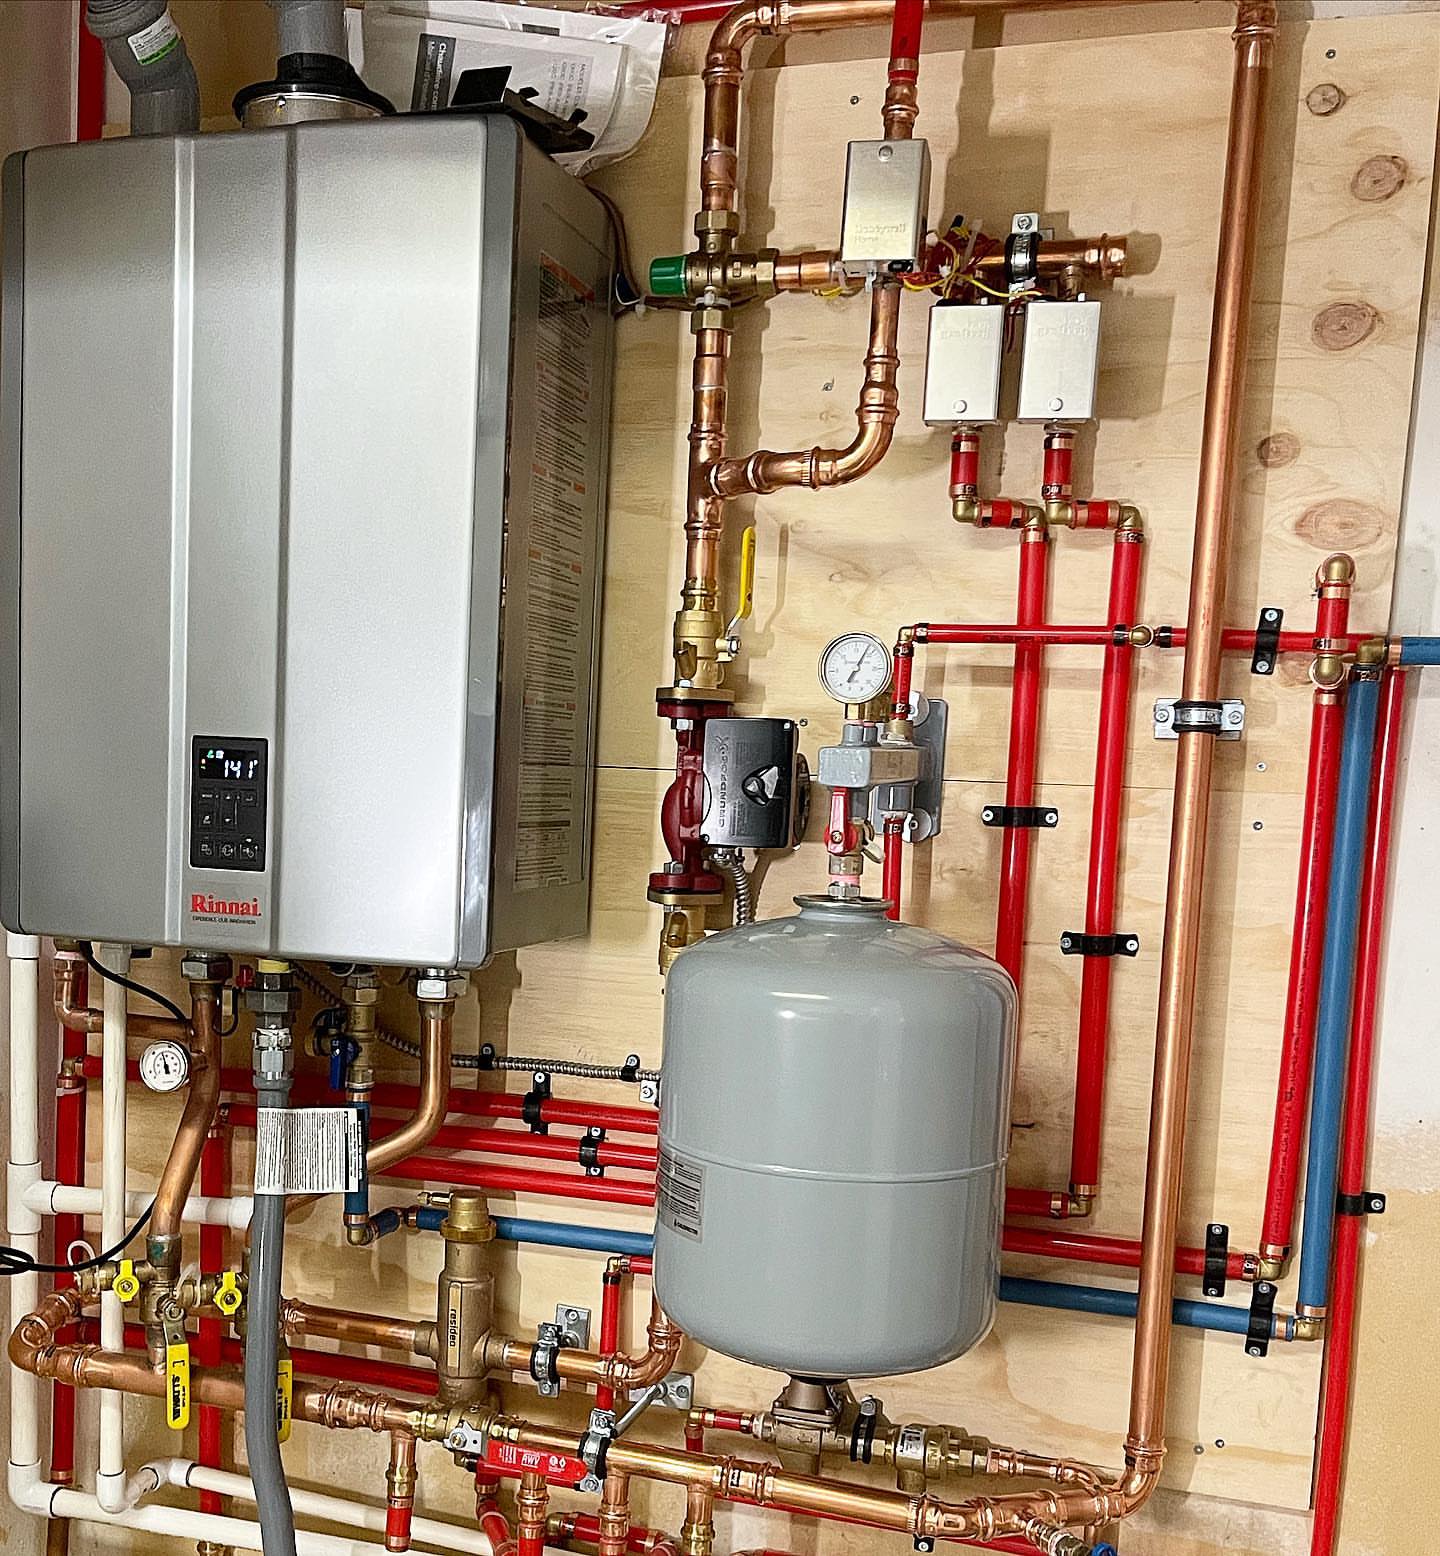 Combi Boiler for Residential Home Heating & Hot Water